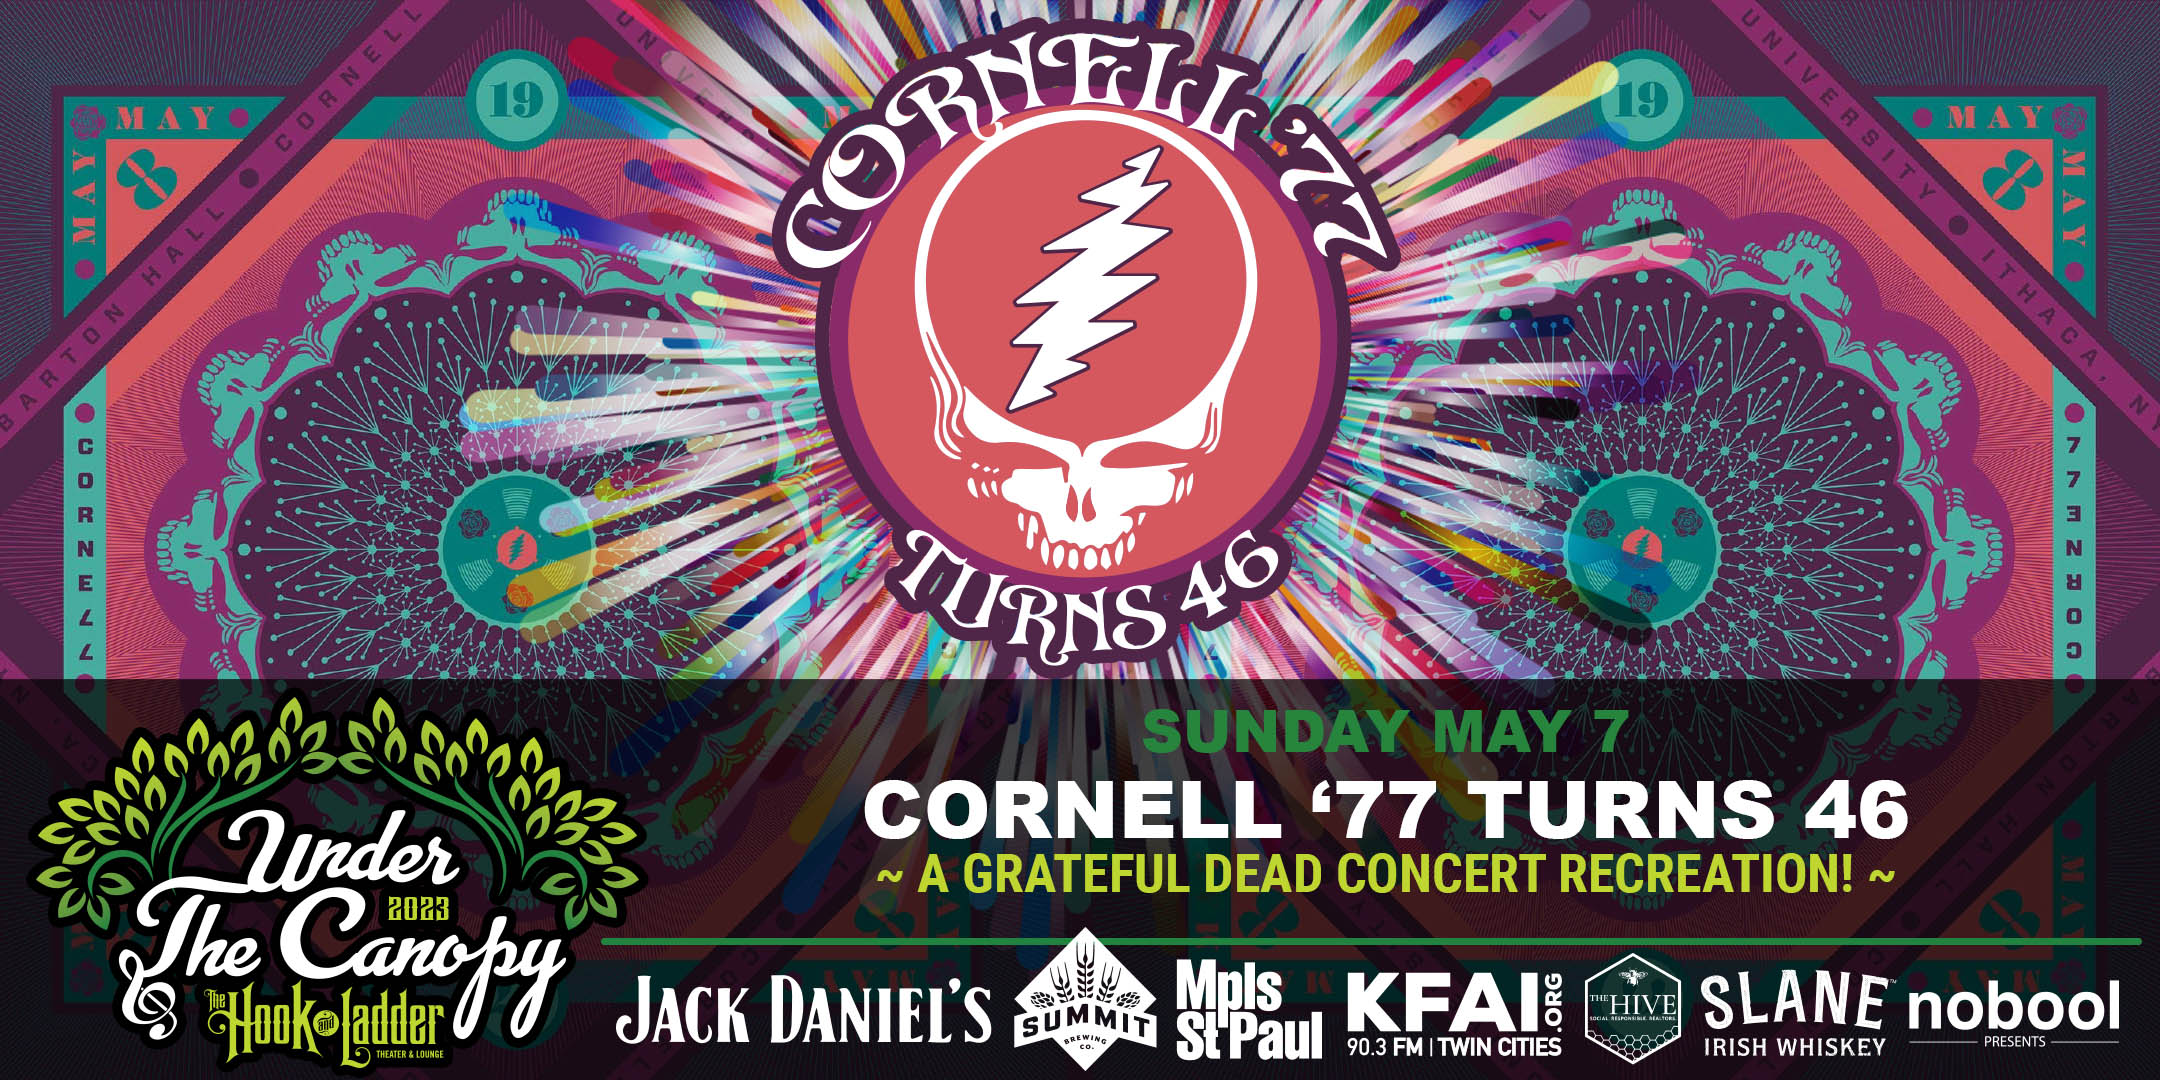 Cornell '77 Turns 46 ~ A Grateful Dead Concert Recreation! ~ Sunday, May 7 Under The Canopy at The Hook and Ladder Theater "An Urban Outdoor Summer Concert Series" Doors 6:00pm :: Music 7:00pm :: 21+ Reserved Seats: $30 GA: $18 ADV / $24 DOS